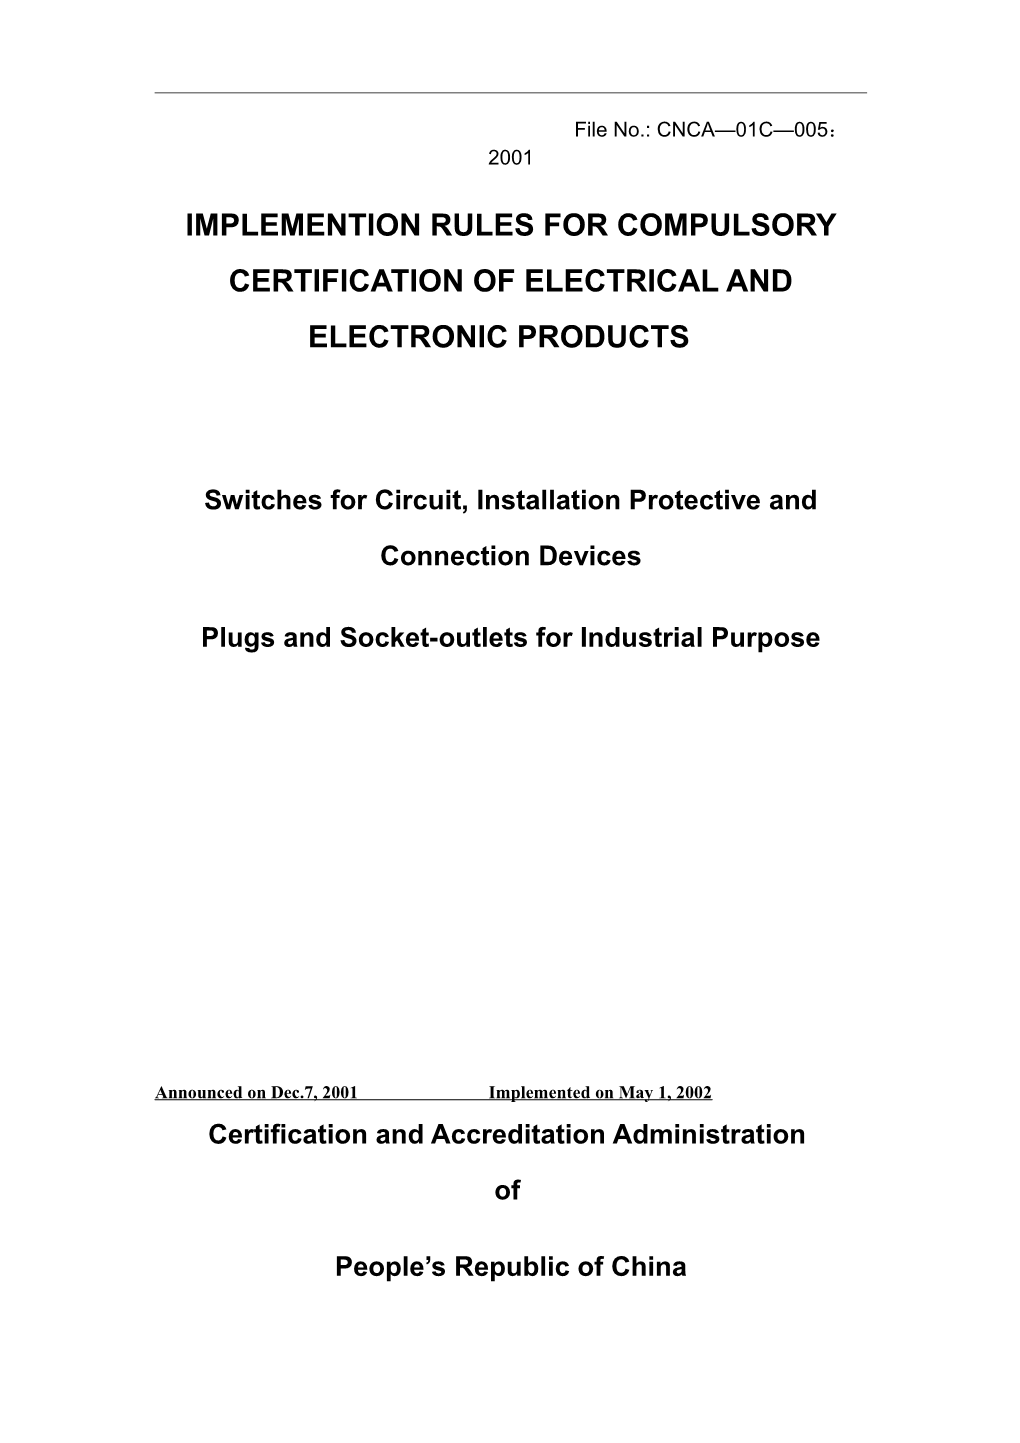 Regulations for Compulsory Certification of Household Electric Appliances s1